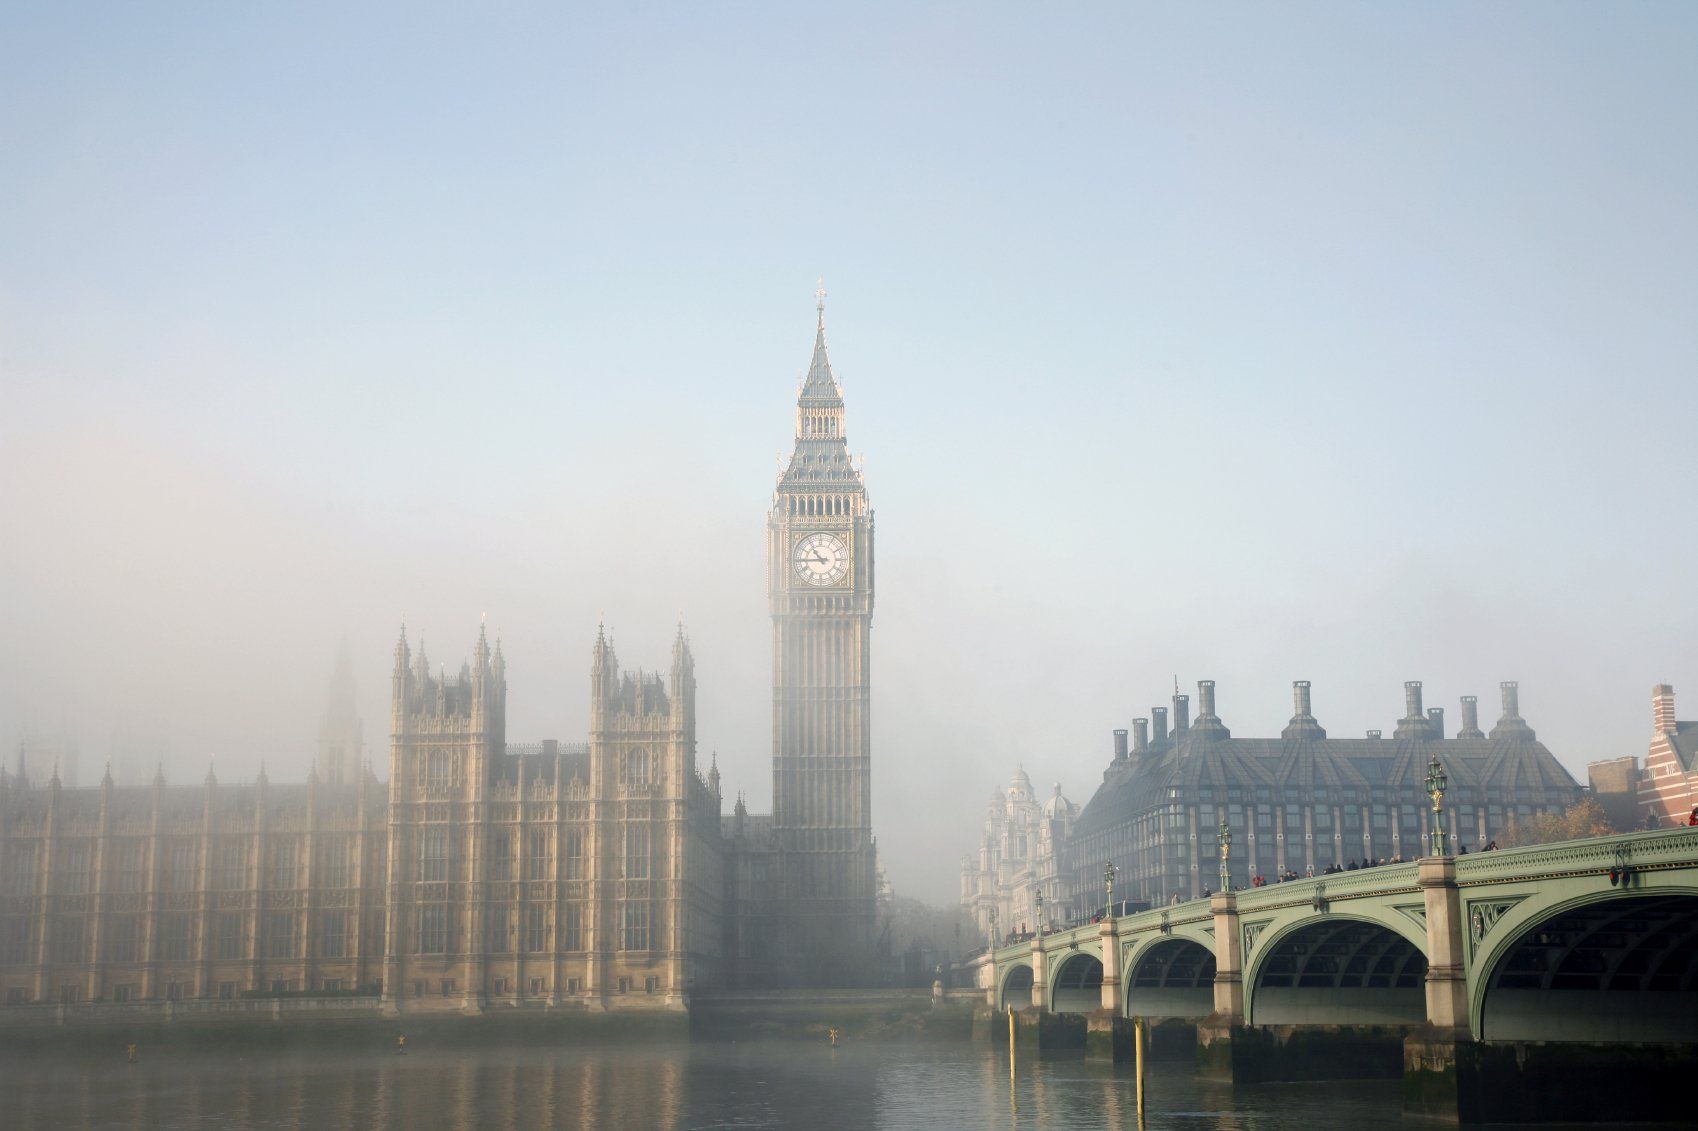 The London parliament building on a hazy day